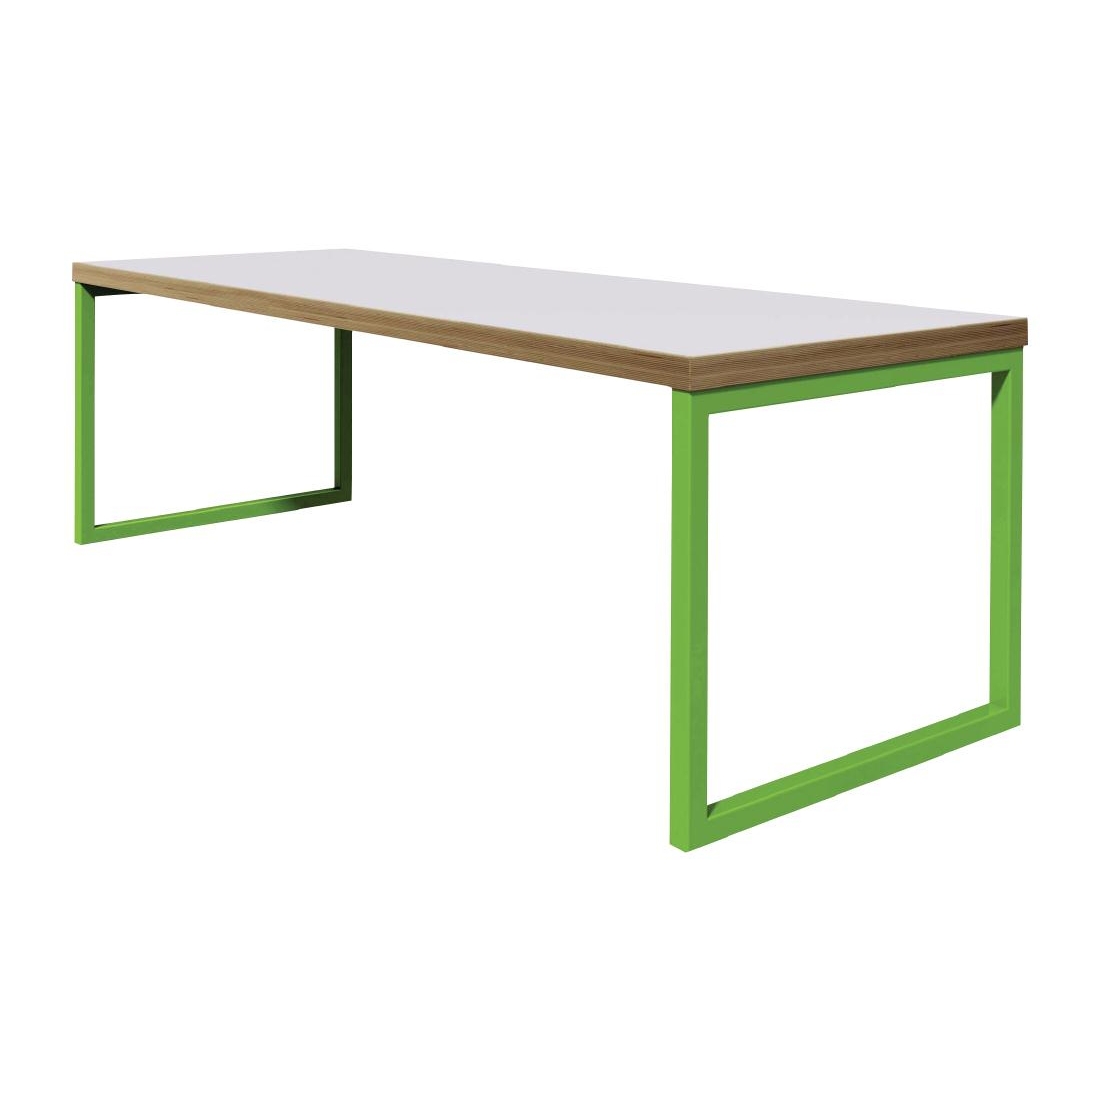 Bolero Dining Table White with Green Frame 6ft